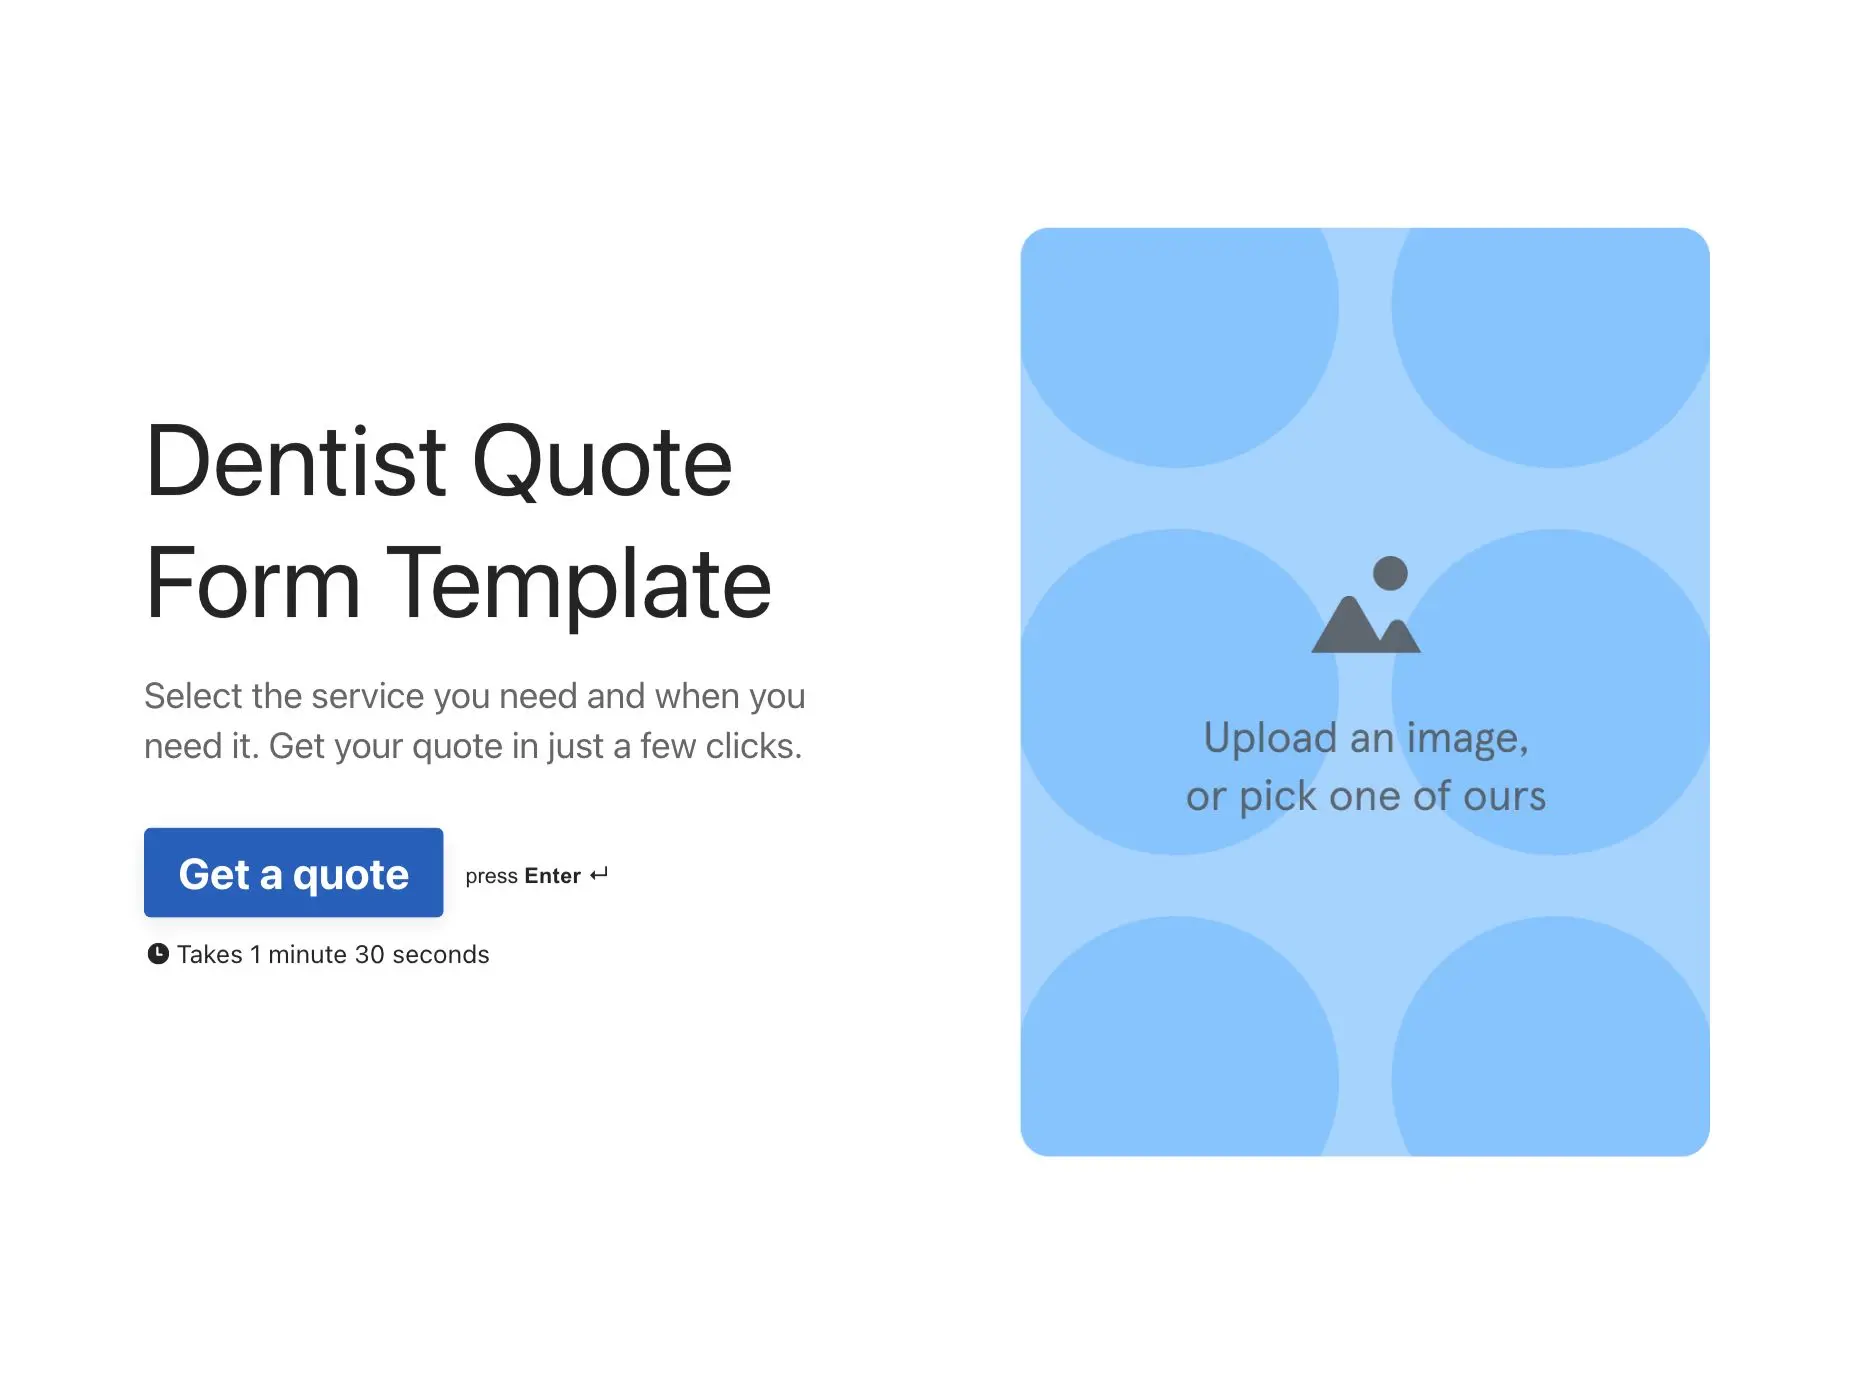 Dentist Quote Form Template Hero